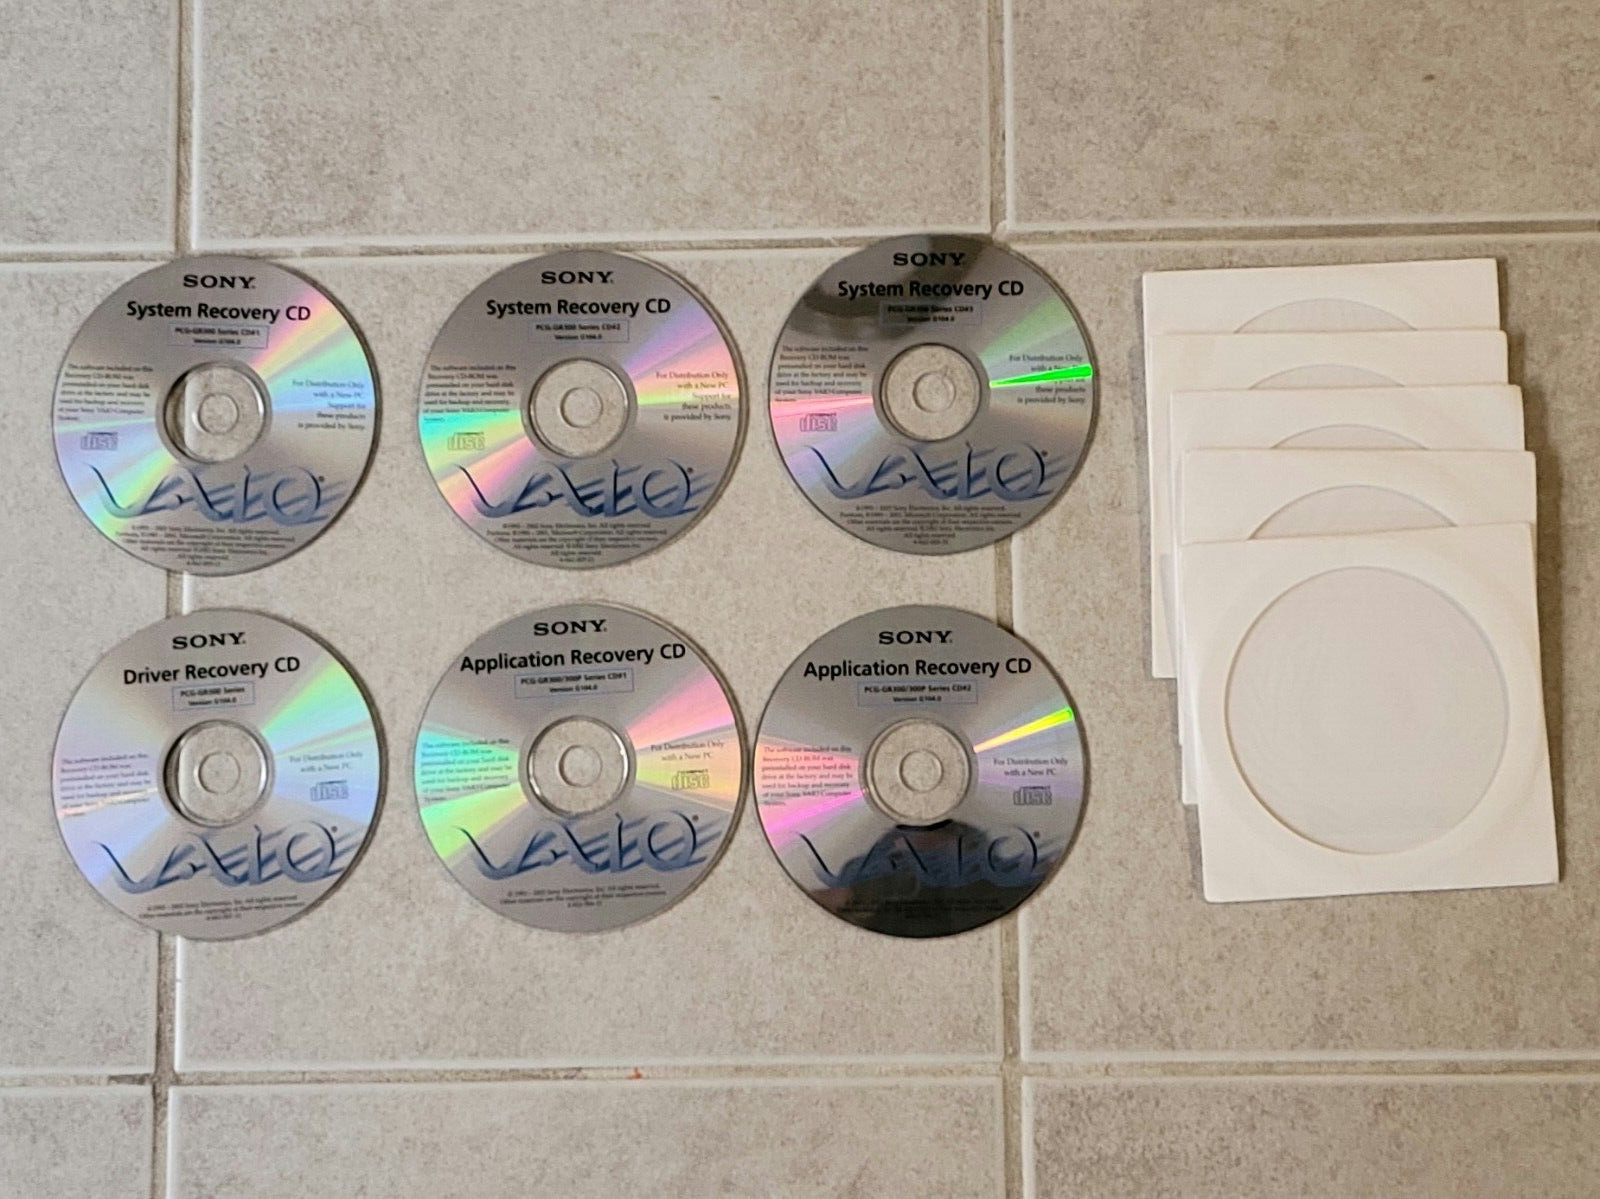 VINTAGE SONY VAIO LAPTOP RECOVERY CD DISCS COMPLETE SET PCG-GR300 VERSION G104.0